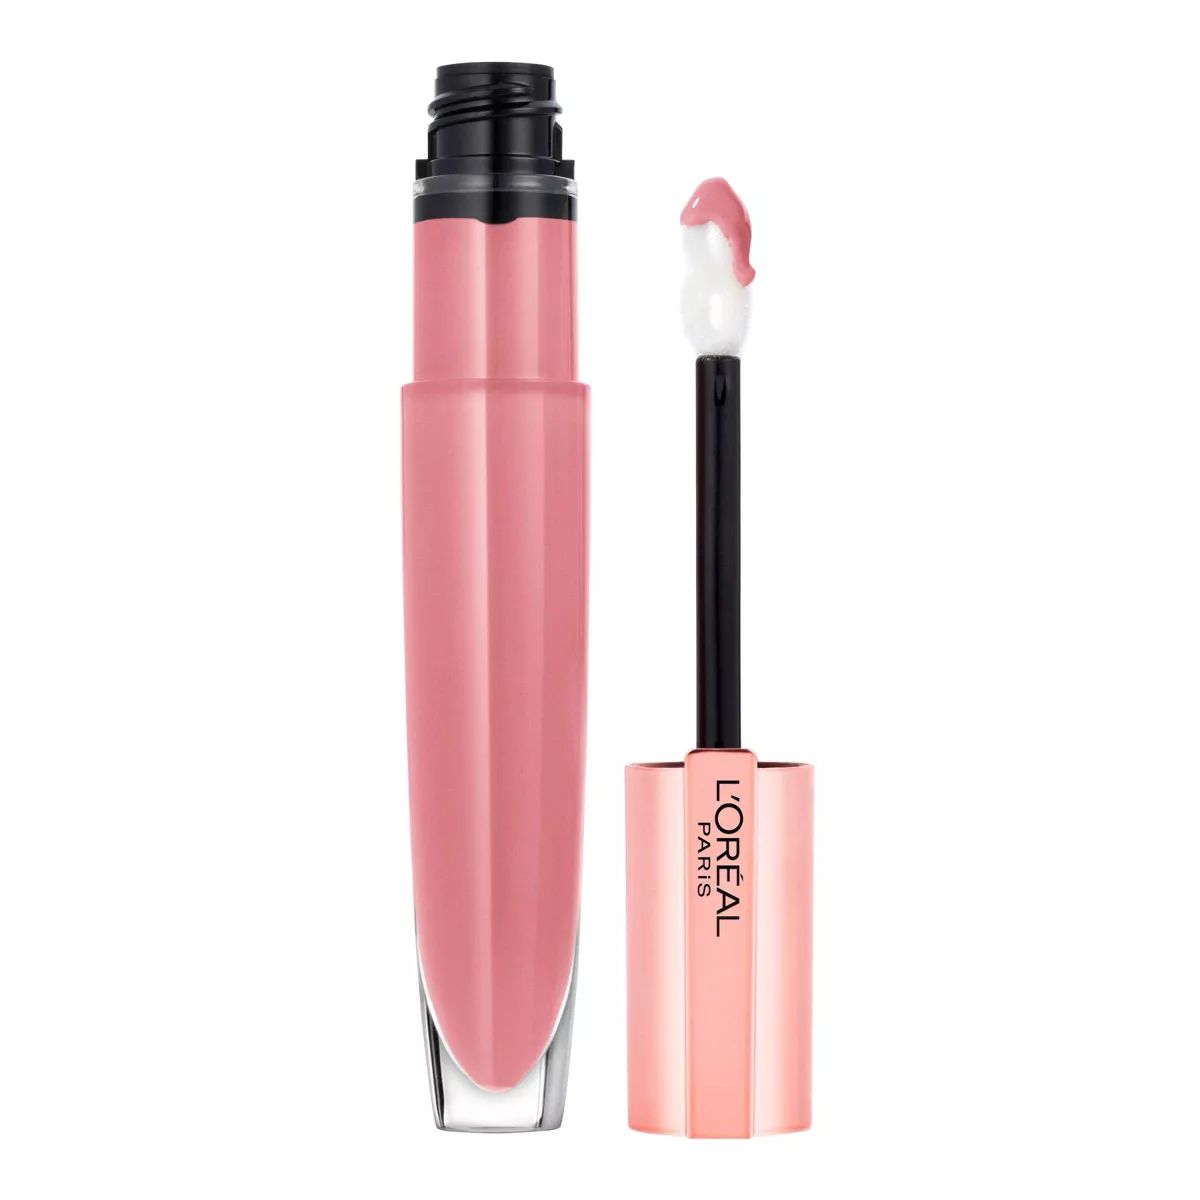 L'Oreal Paris Glow Paradise Lip Balm-in-Gloss with Pomegranate Extract - 0.23 fl oz | Target